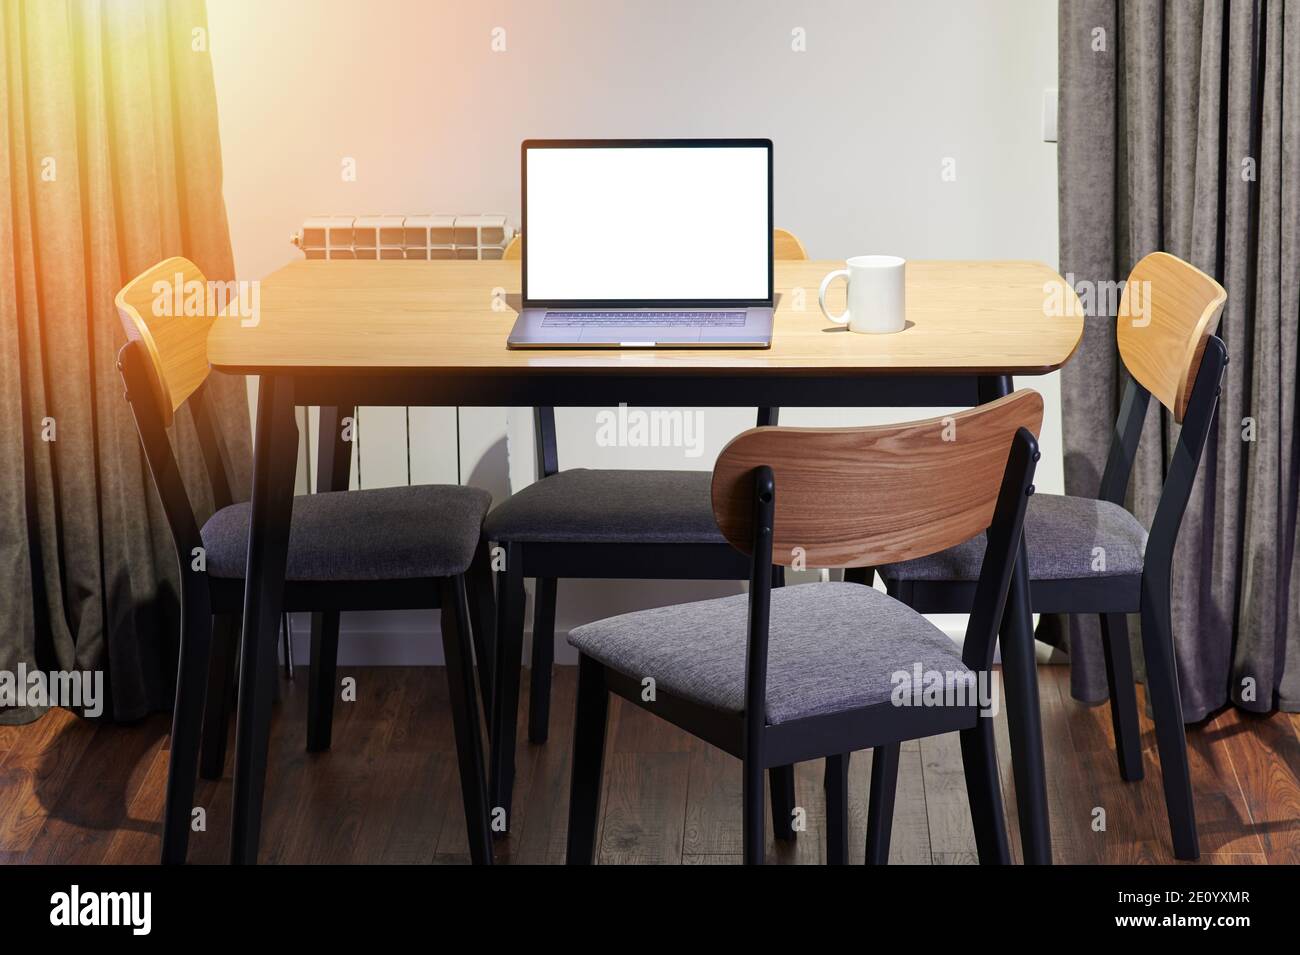 Modern interior with wooden table and laptop. Workspace in house Stock Photo